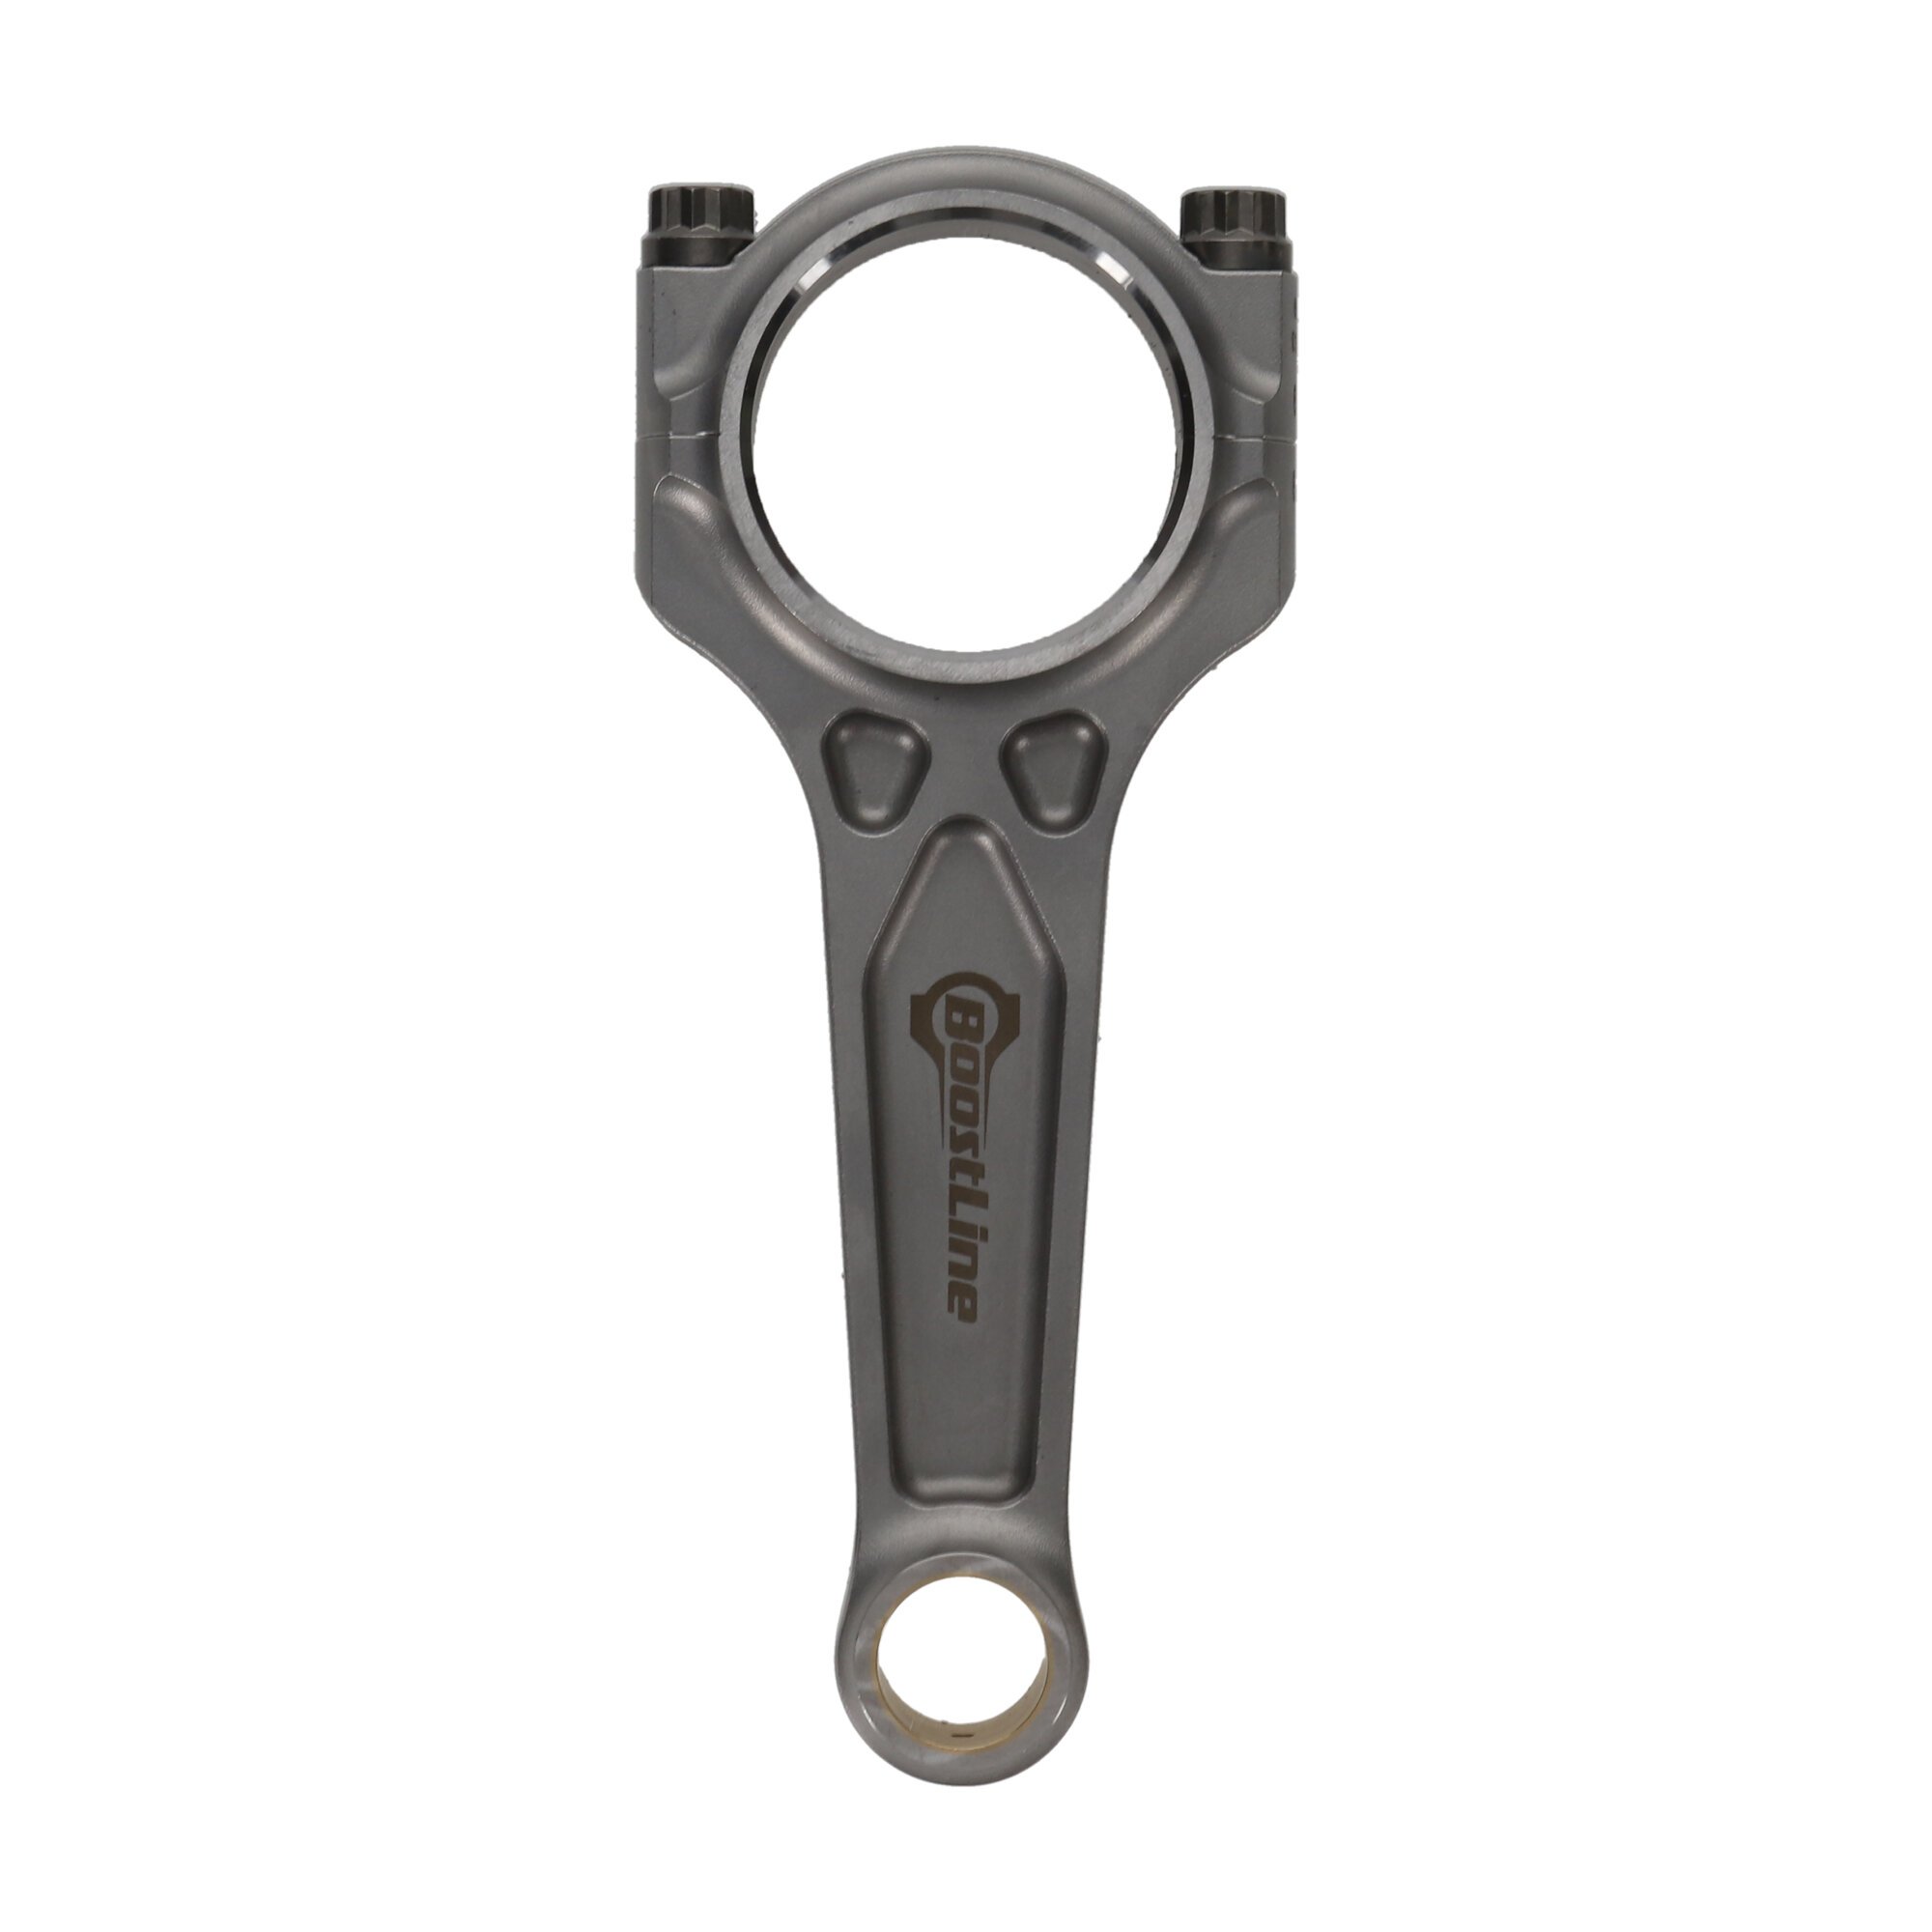 Toyota, 2JZ-GE, 142.00 mm Length, Connecting Rod